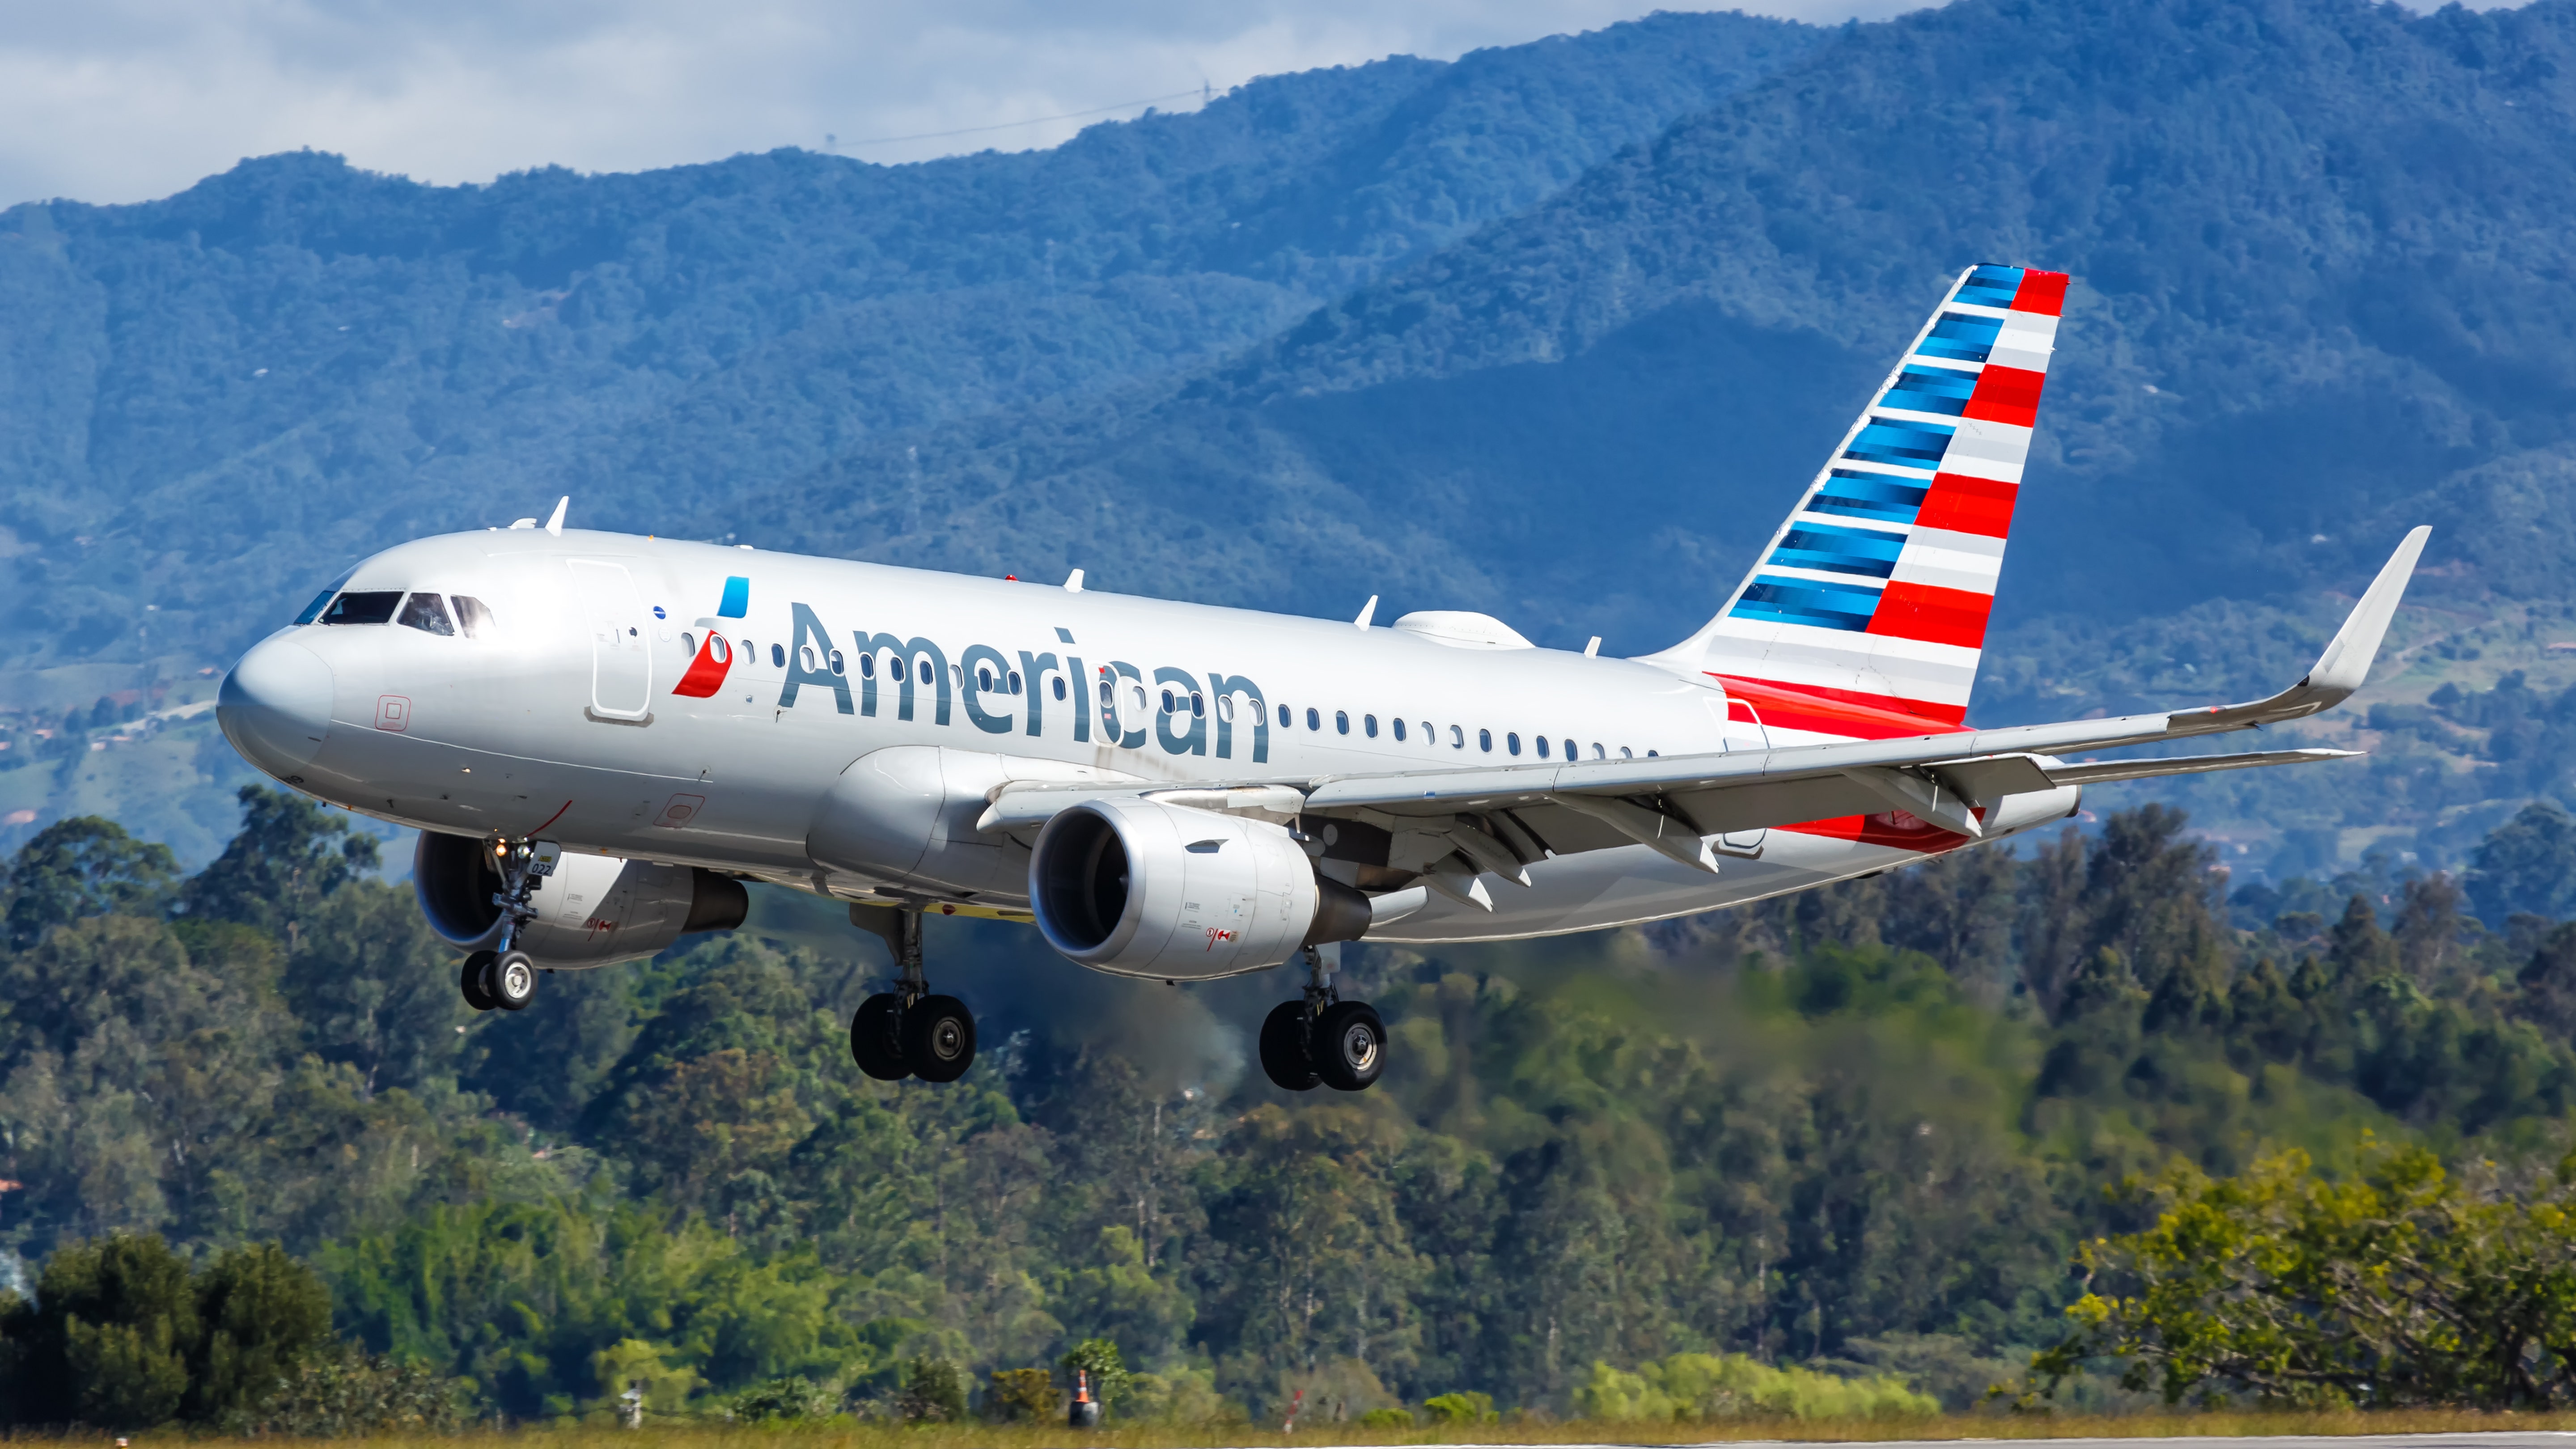 american airlines competitive advantage